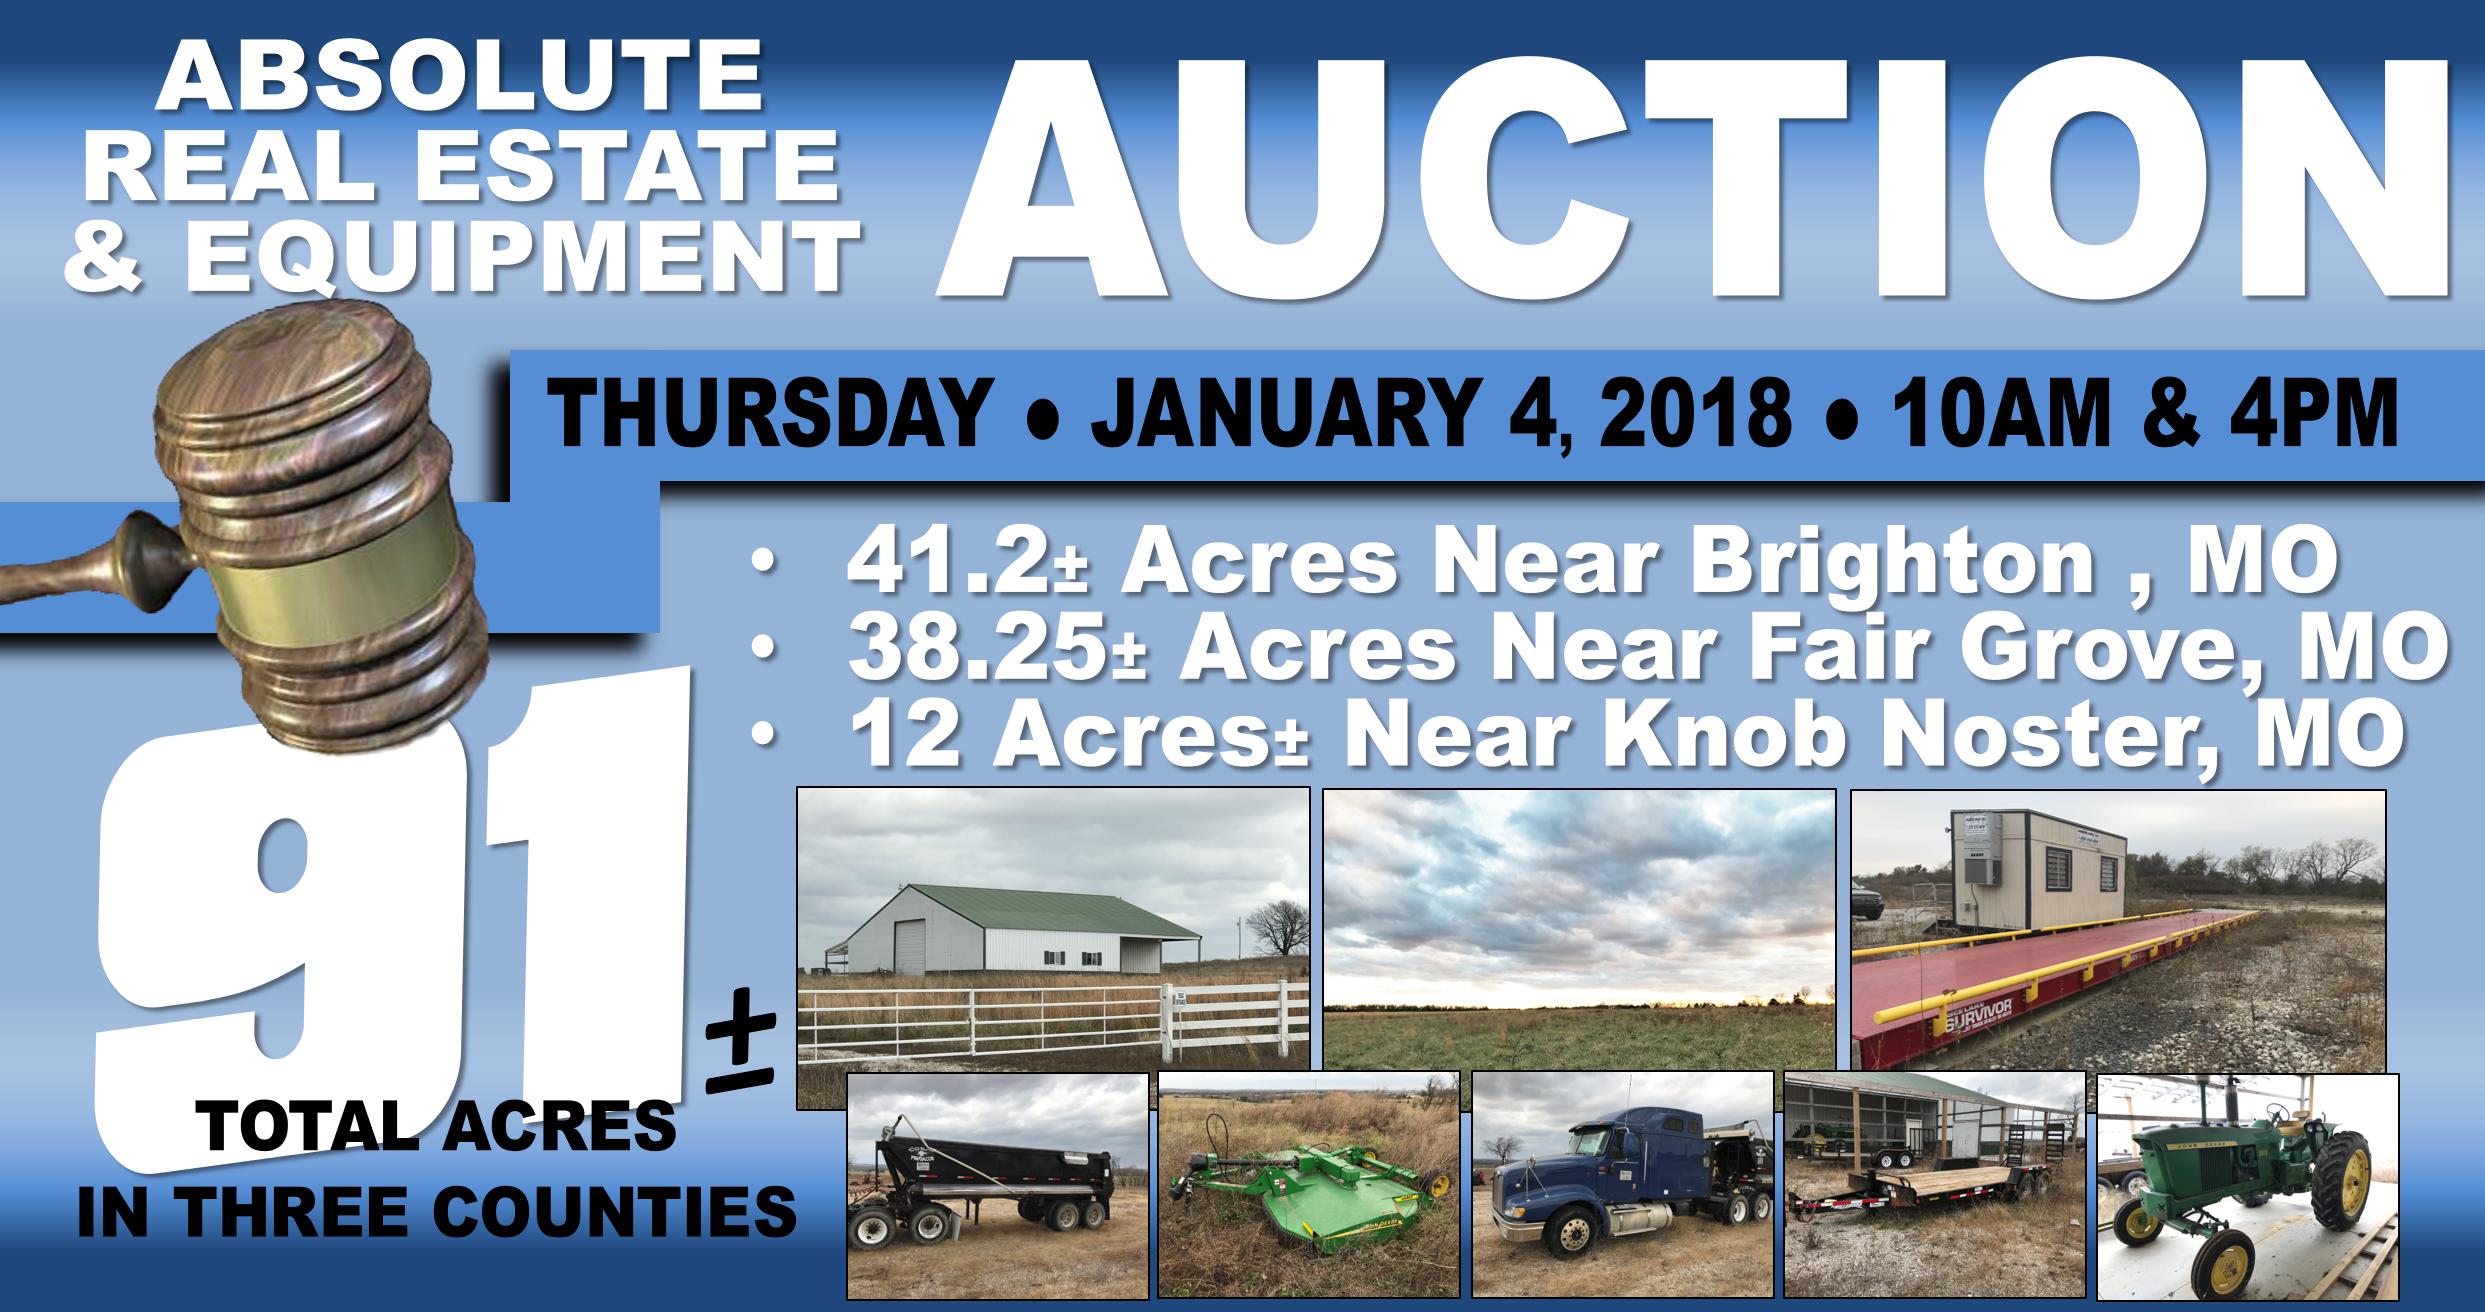 ABSOLUTE REAL ESTATE & EQUIPMENT AUCTION